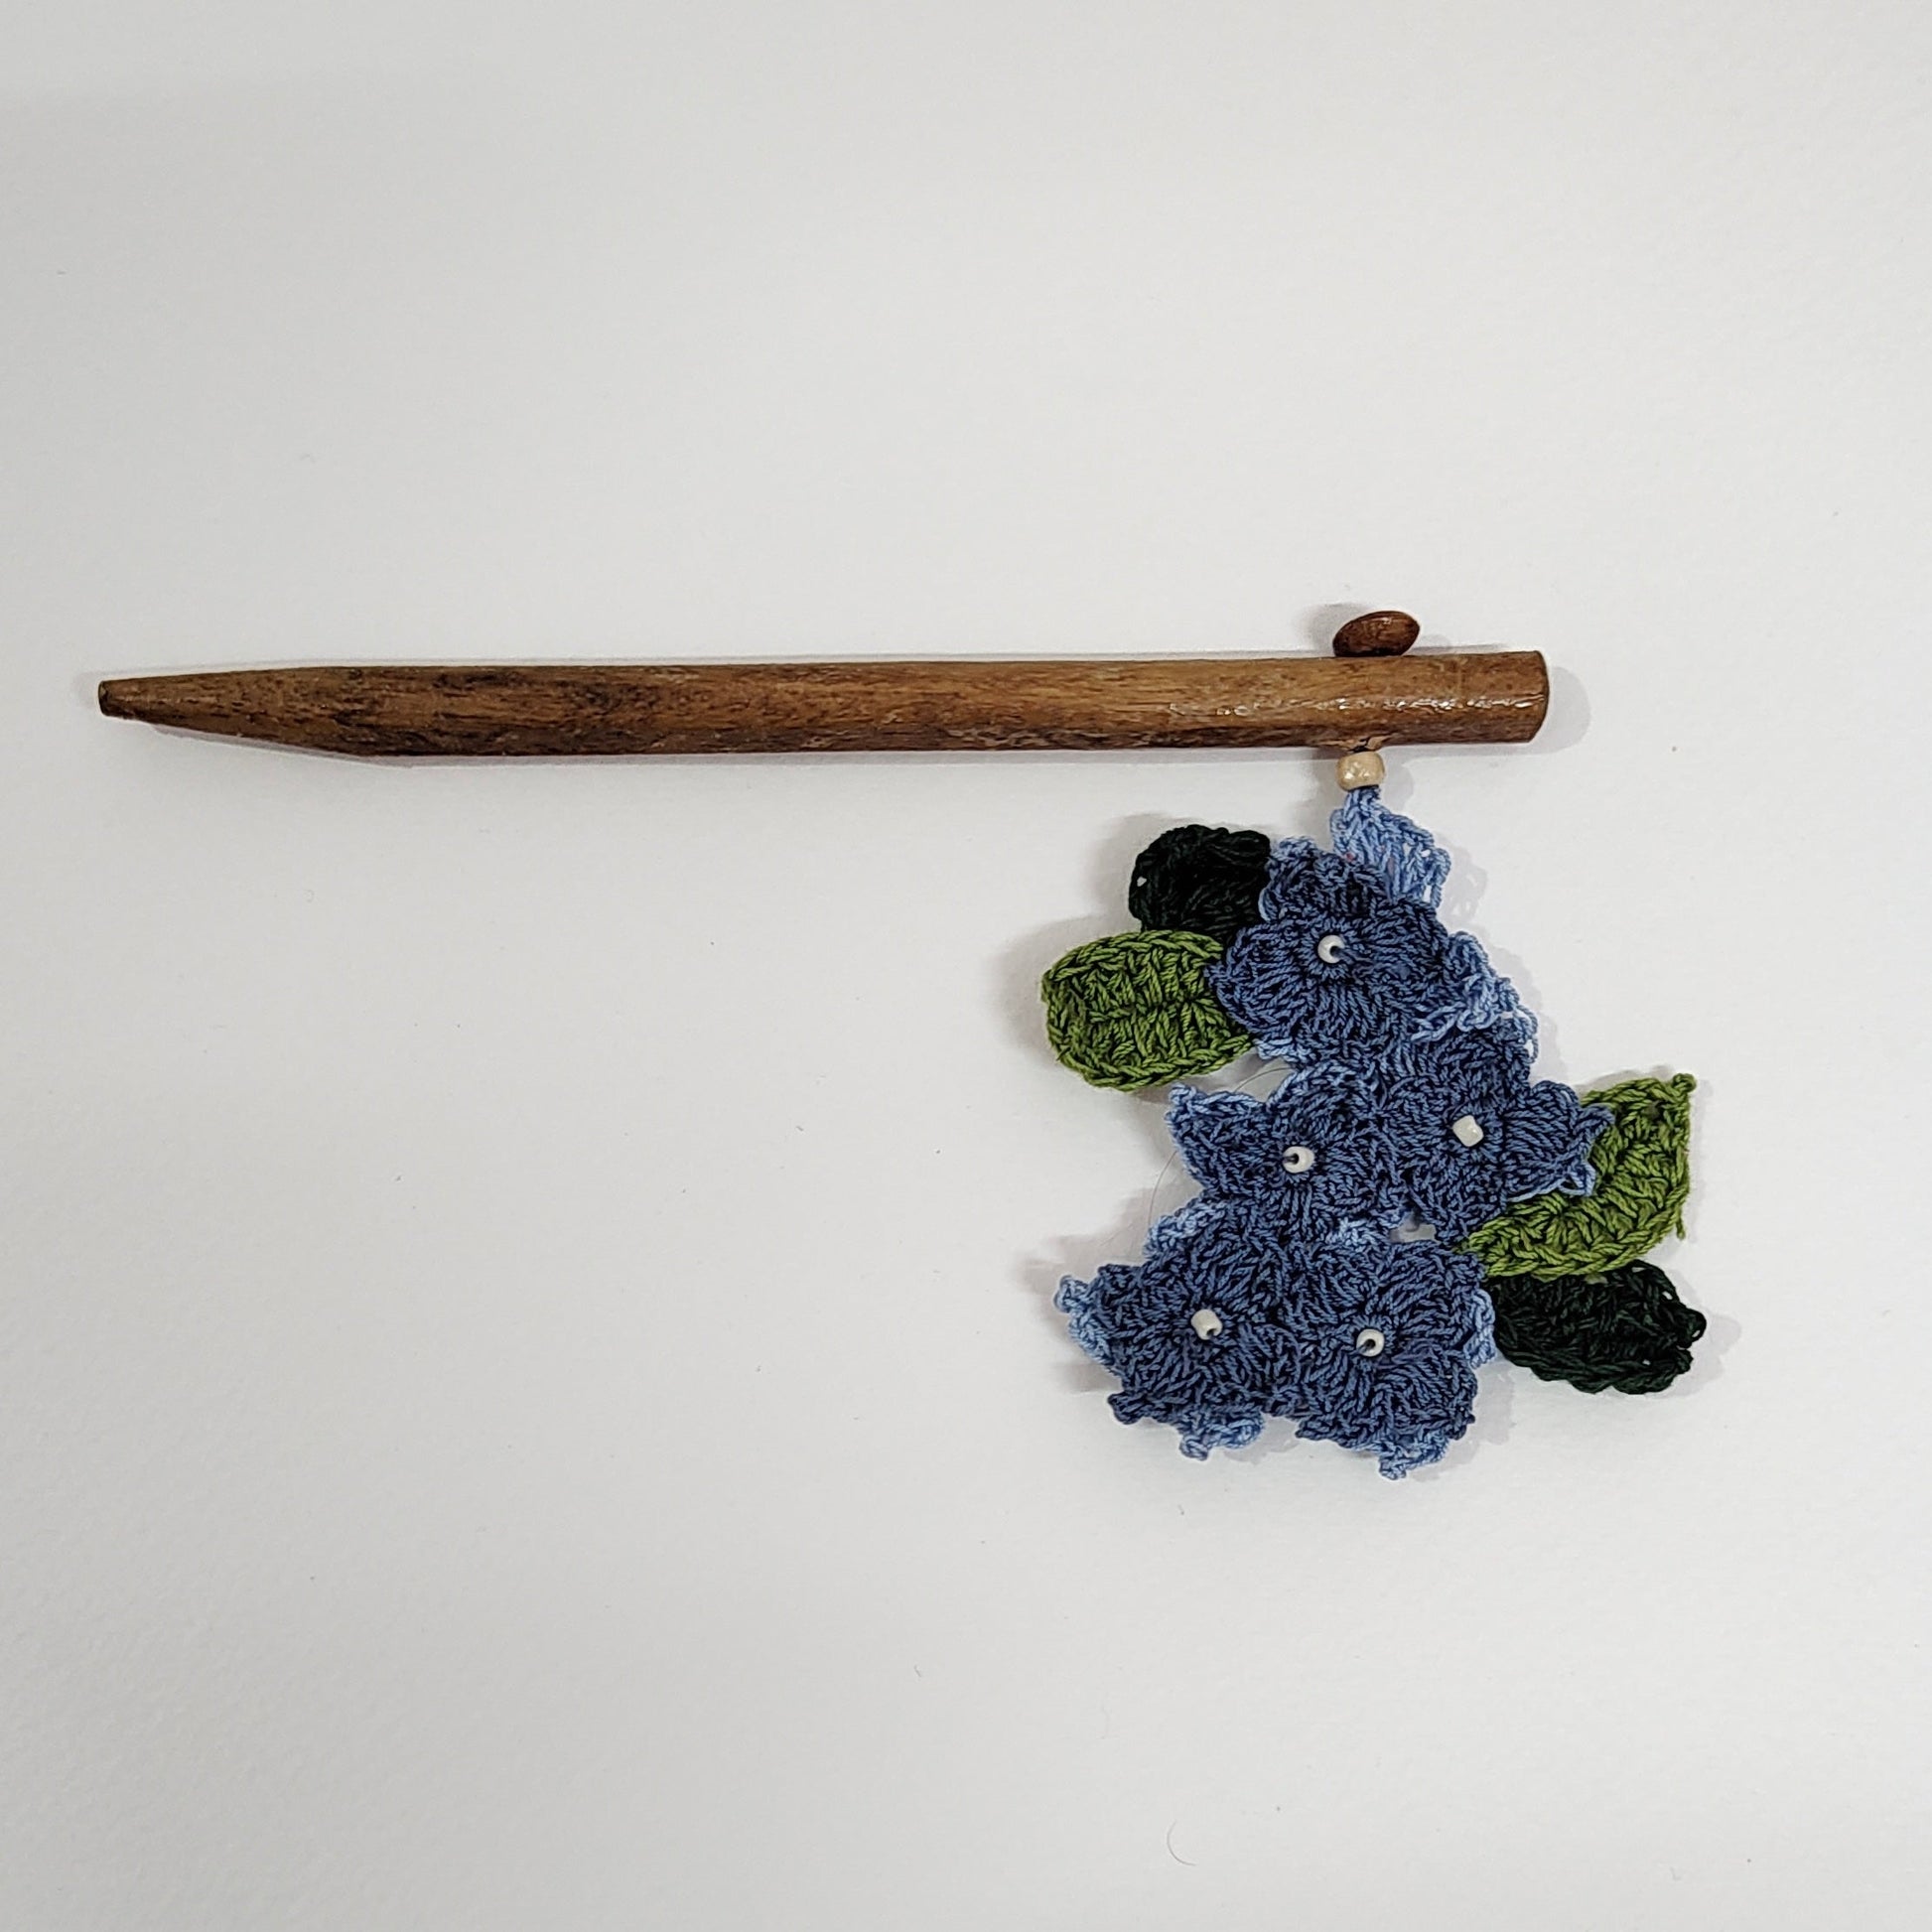 Wooden Hair Stick Blue And Green at Kamakhyaa by Ikriit'm. This item is Accessories, Blue, Cotton Yarn, Green, Hair Accessory, Ikriit'm, Wood